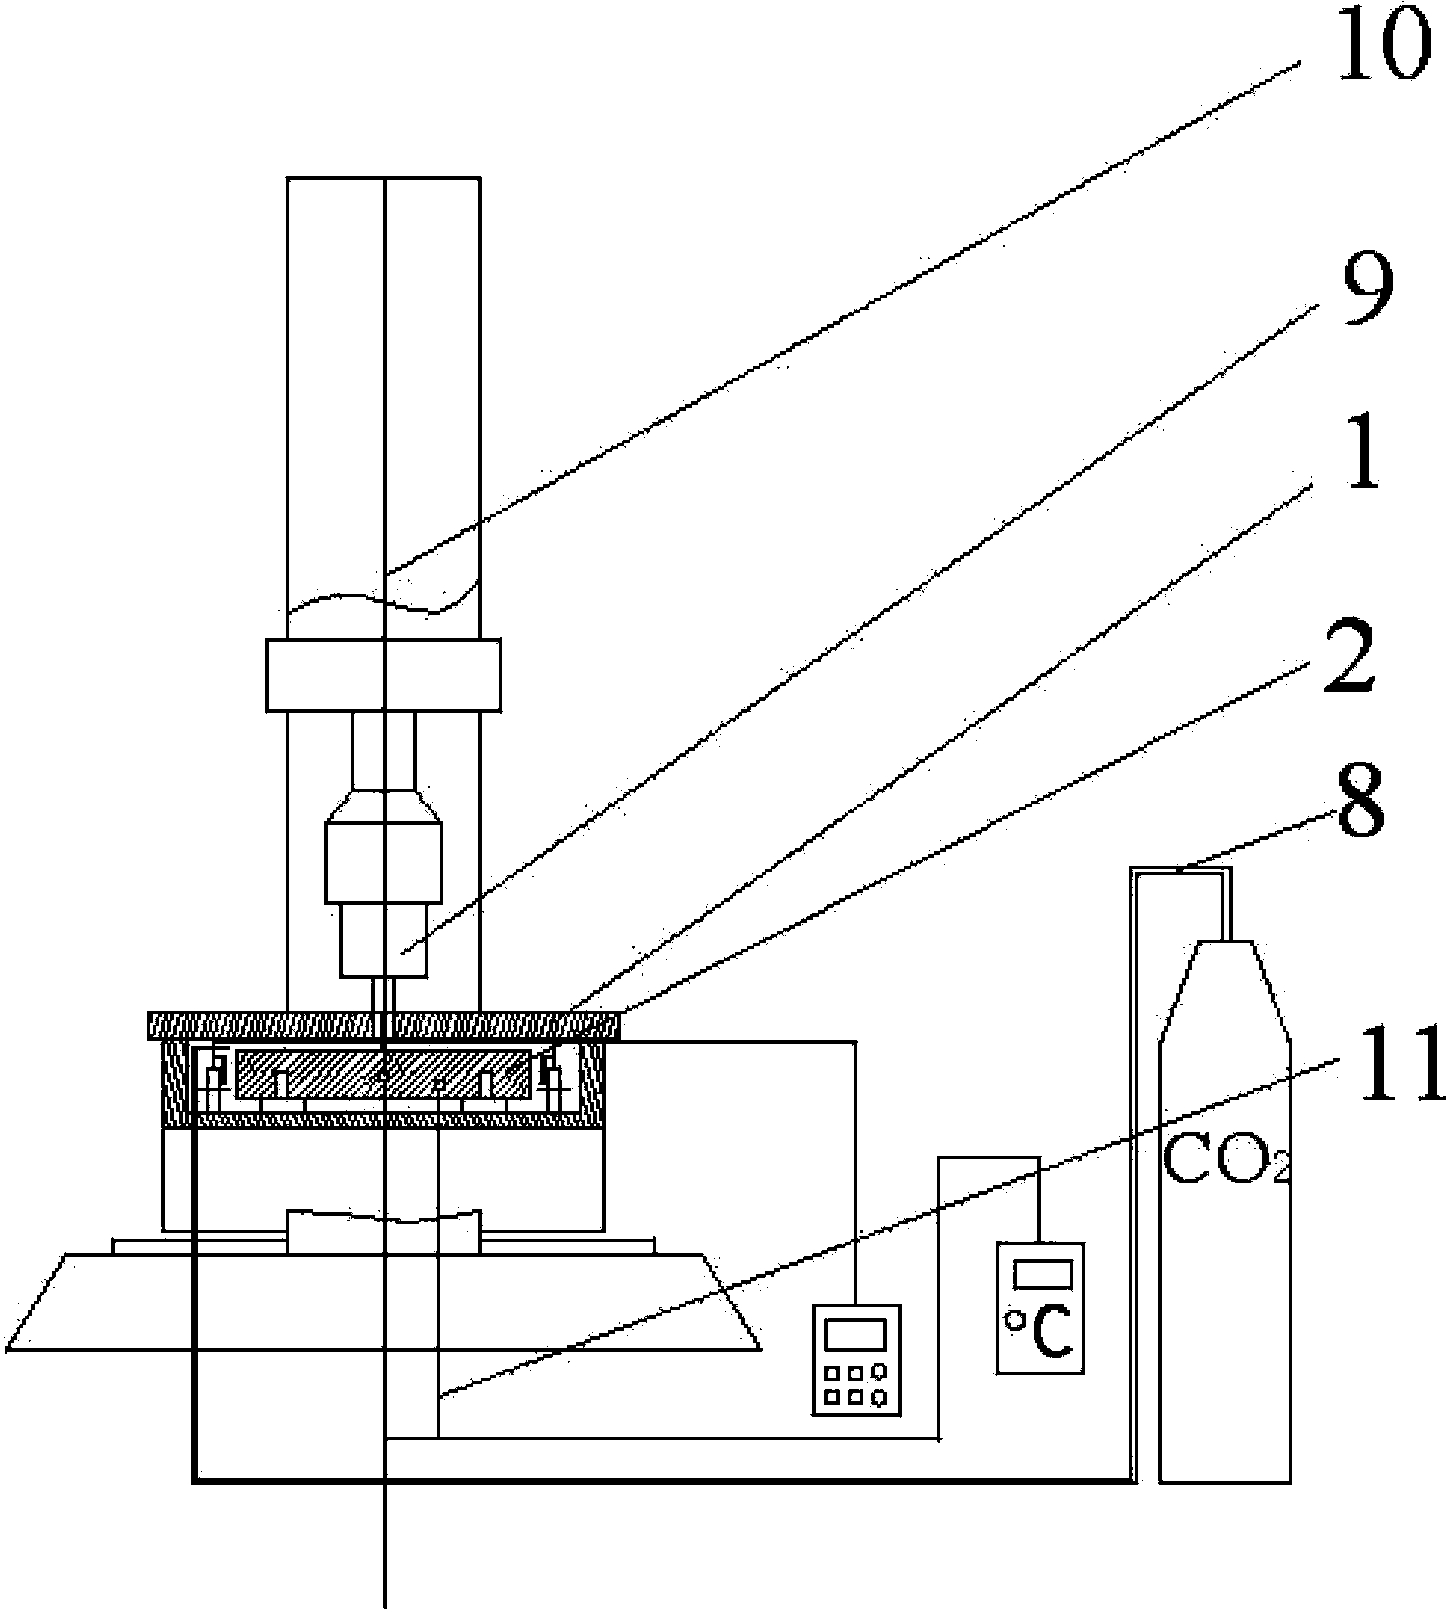 Temperature control device for measurement on modulus of elasticity in static bending of wood